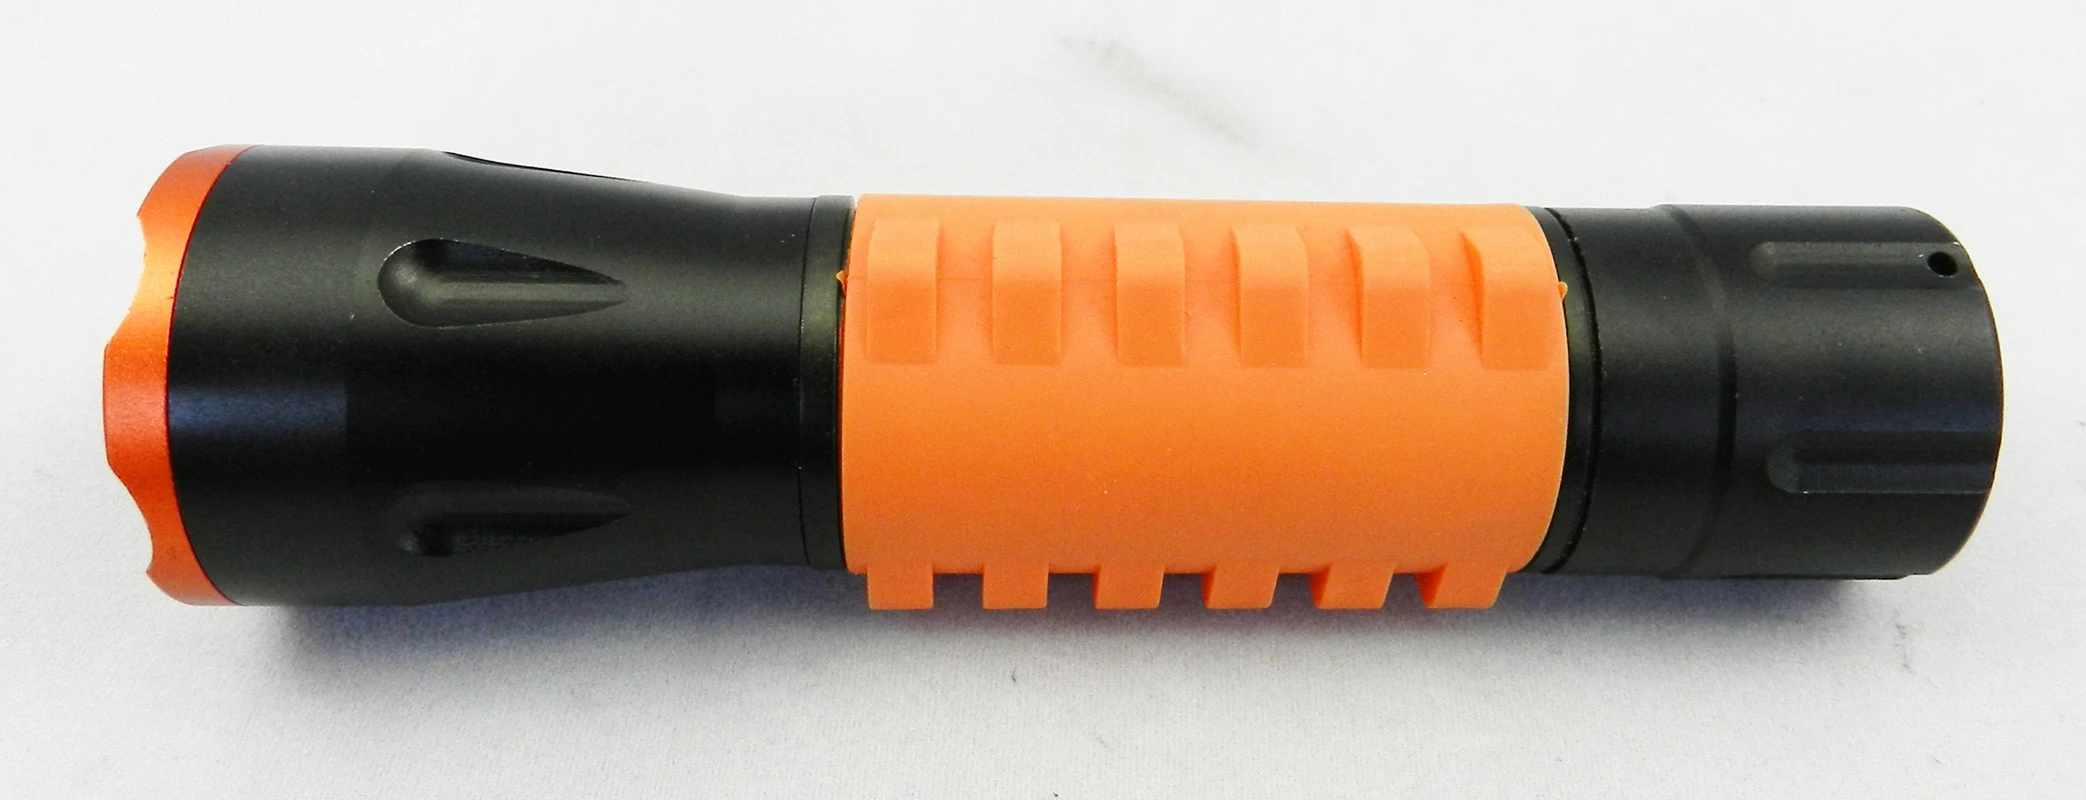 Small size and high brightness cob high power led rechargeable torch flashlight